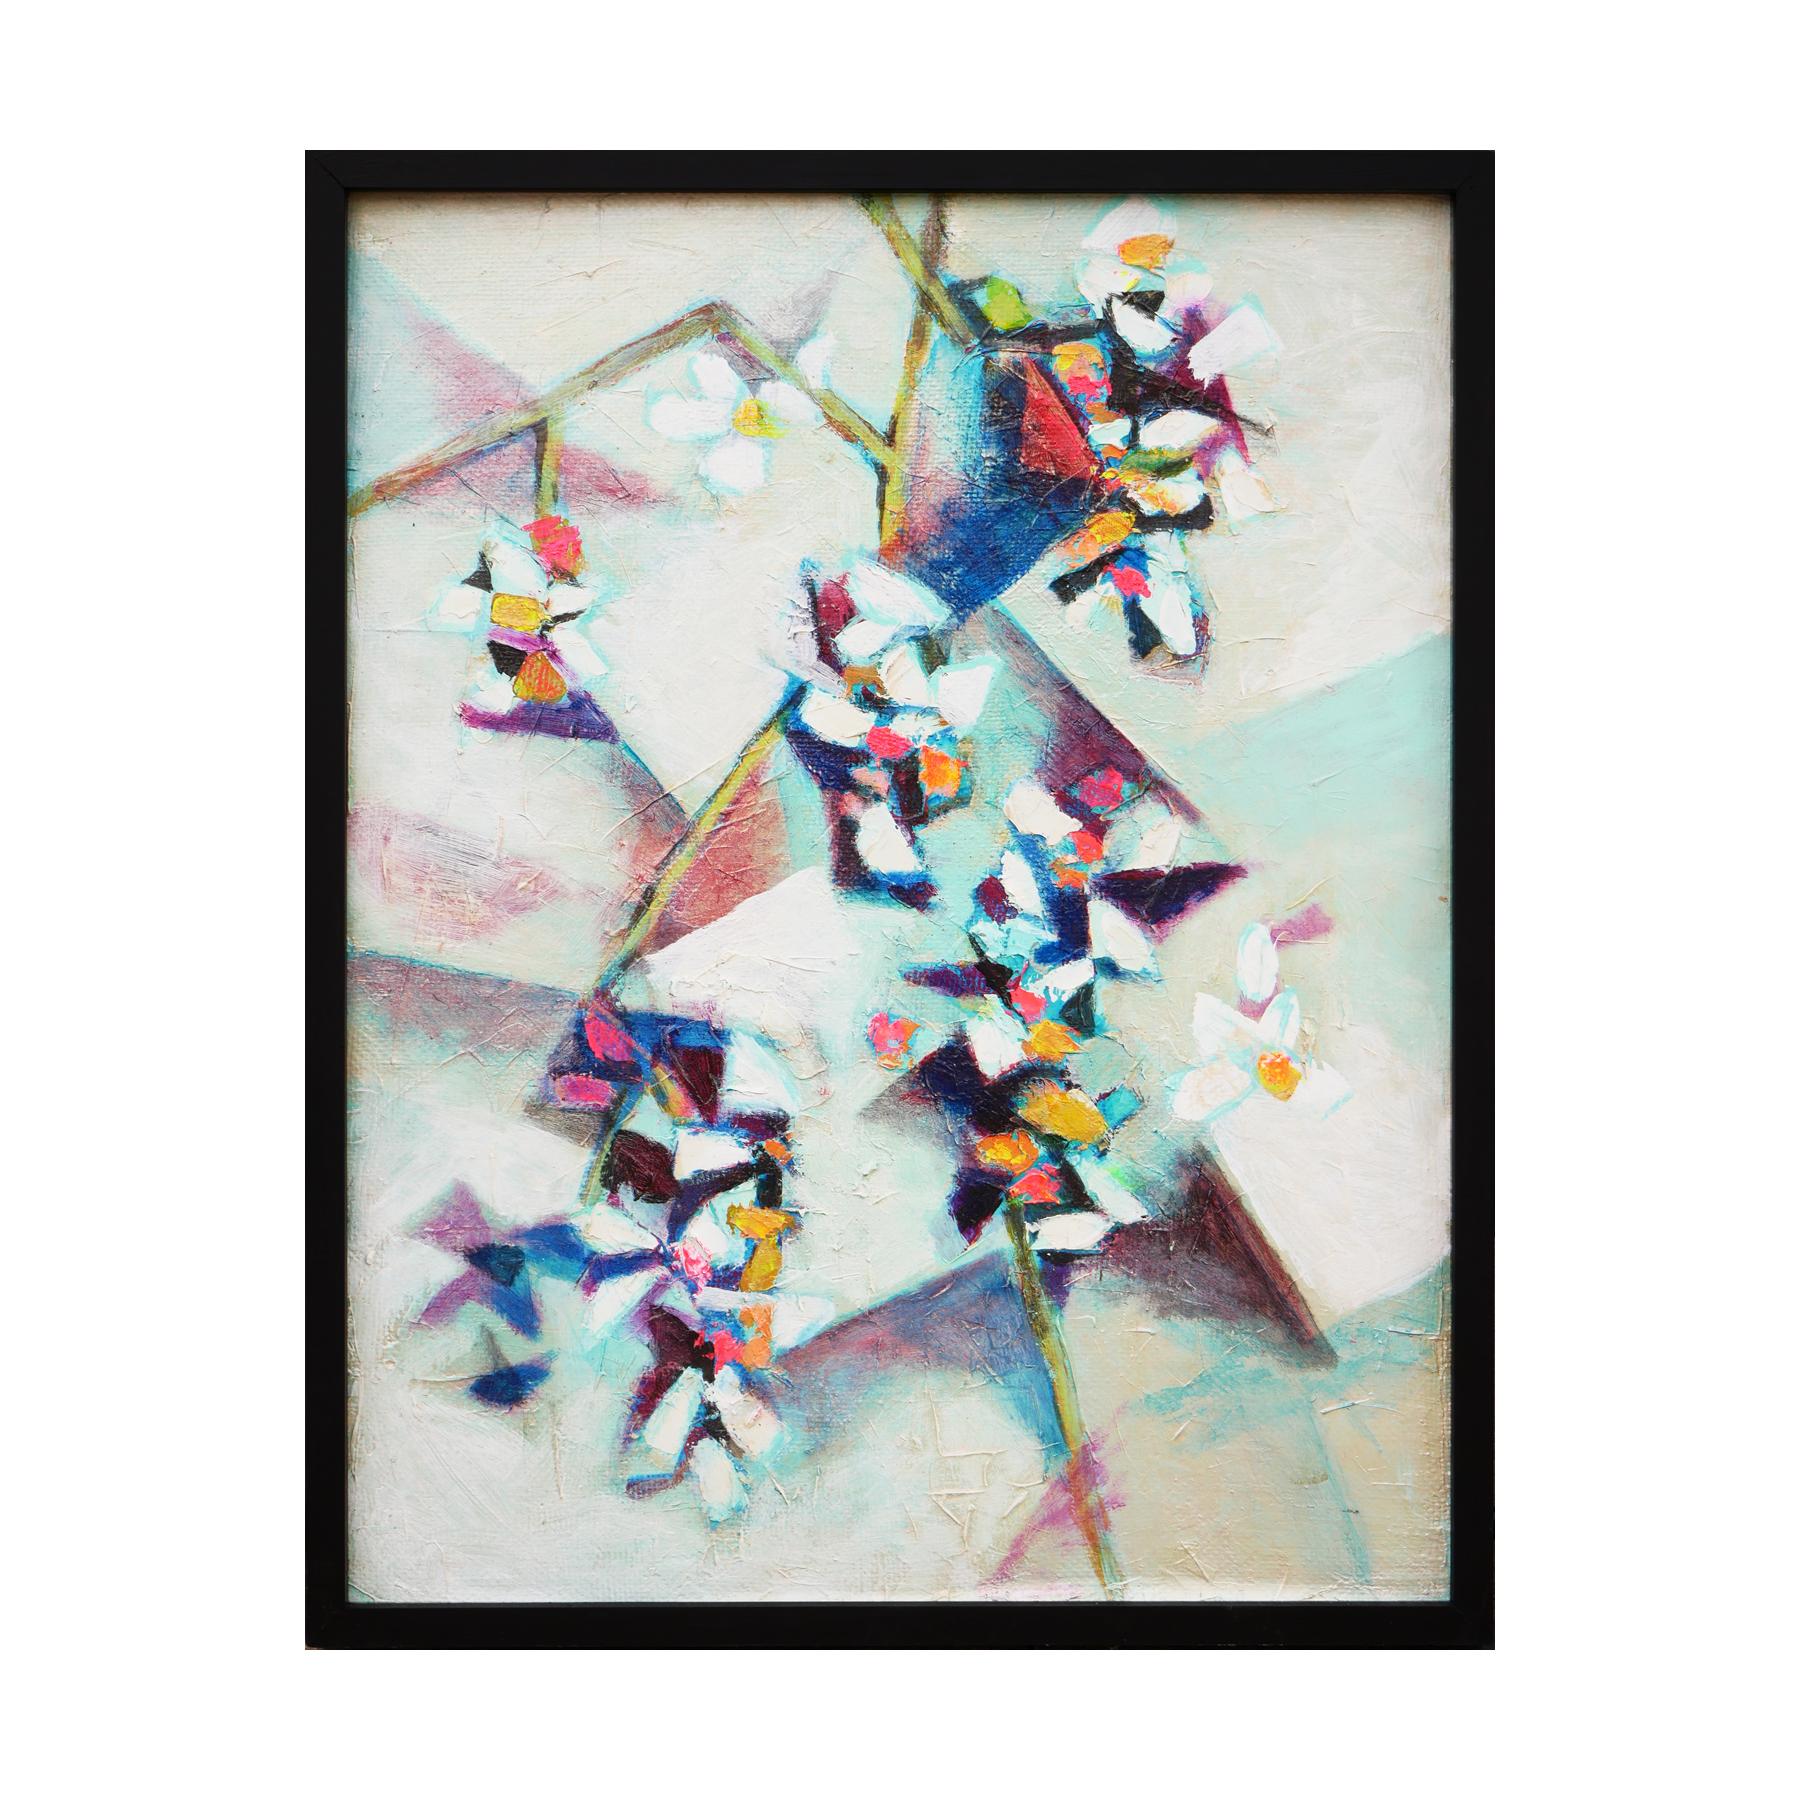 Pastel-toned abstract cubist floral still life by Houston, TX artist David Adickes. The painting depicts orange, purple, and yellow flowers against a pastel-toned cubist background. Unsigned. Framed in a modern black frame. 

Dimensions Without